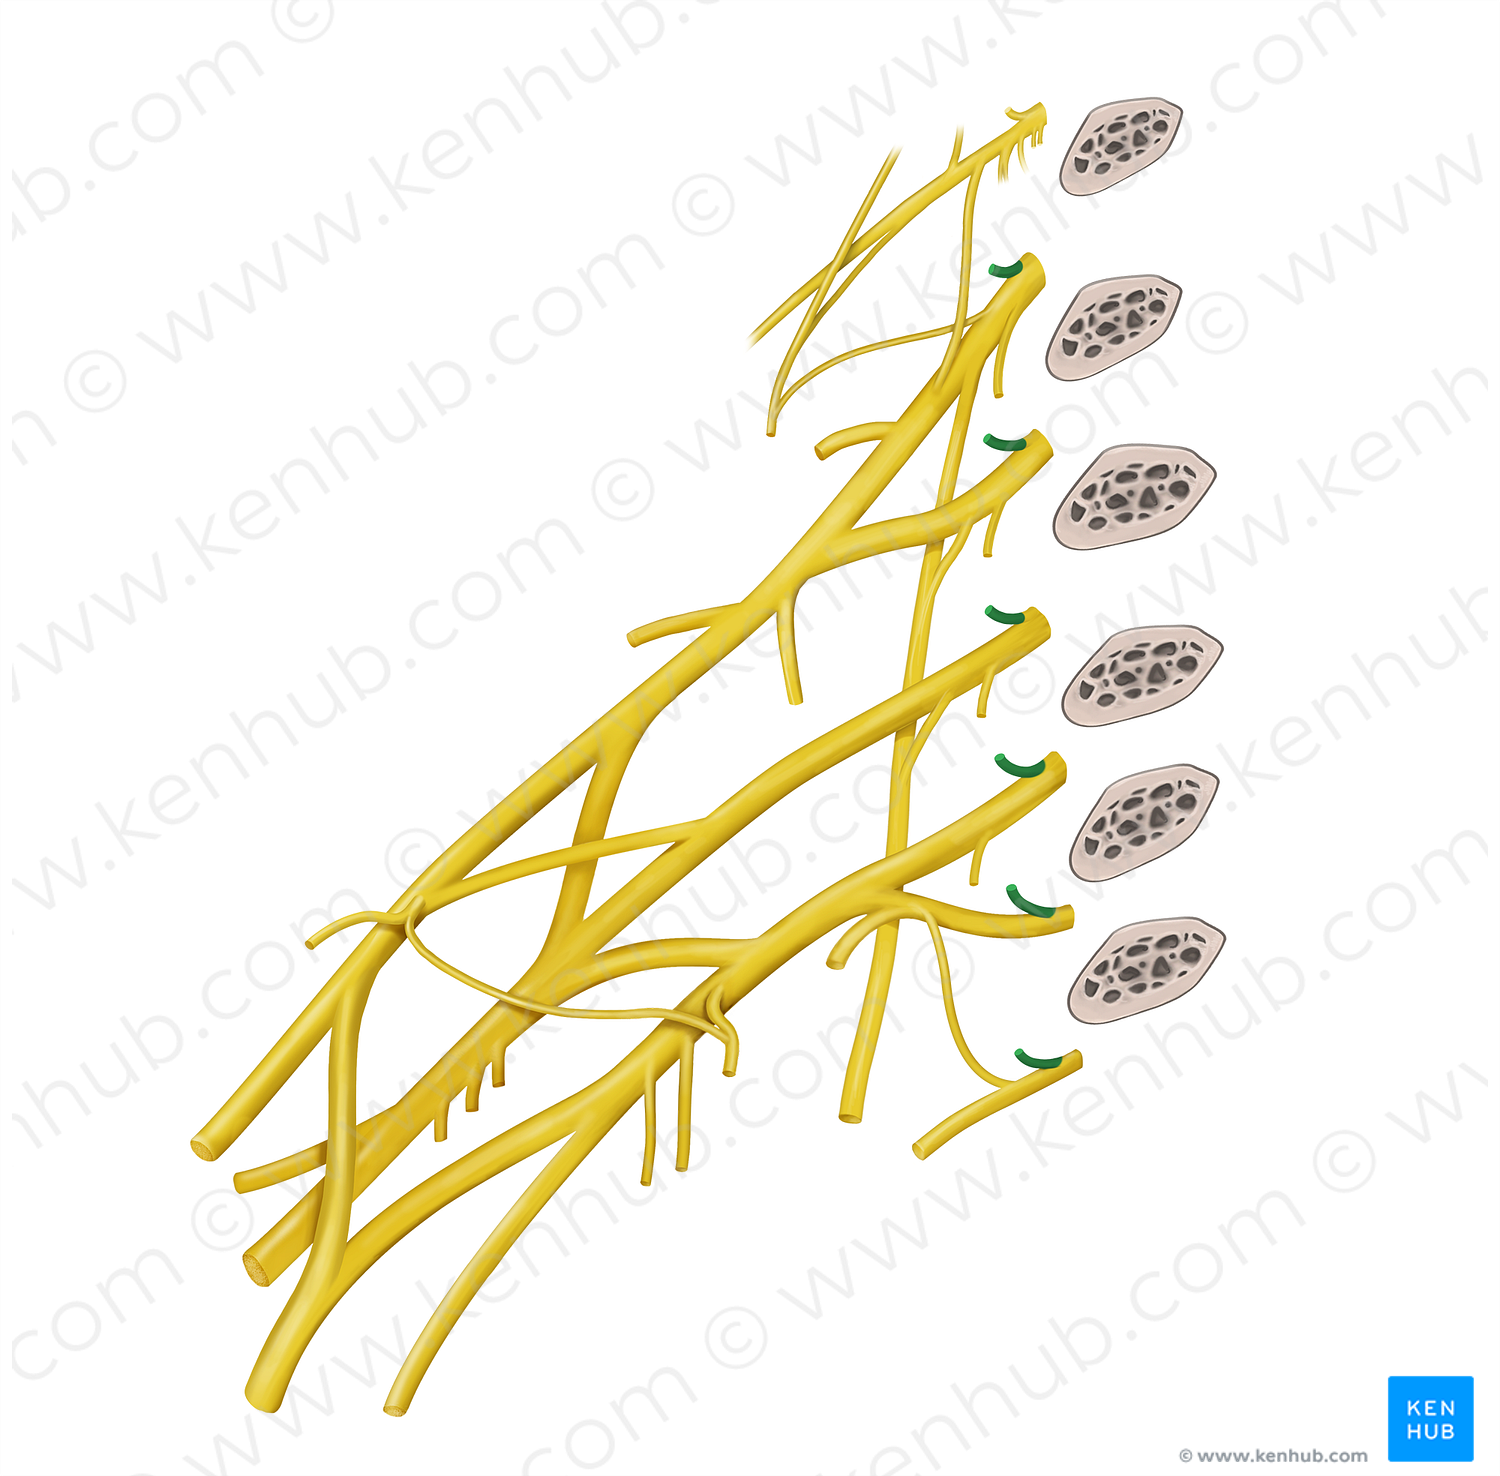 Posterior rami of spinal nerves C5-T2 (#20581)